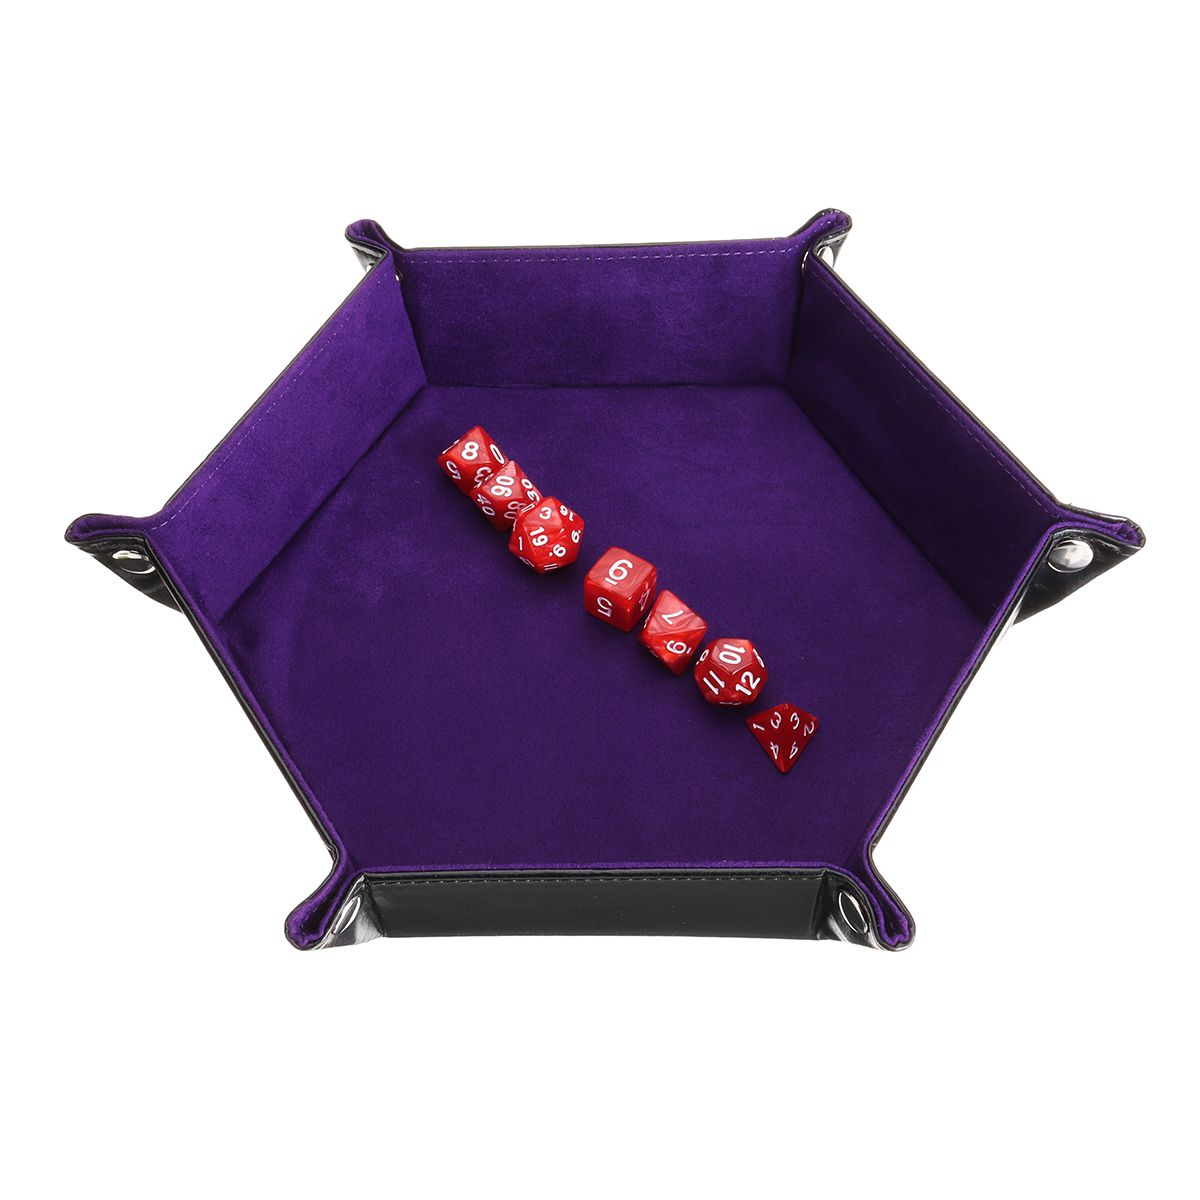 Multisided-Dices-Set-Holder-Polyhedral-Dices-Purple-PU-Leather-Tray-for-RPG-1373171